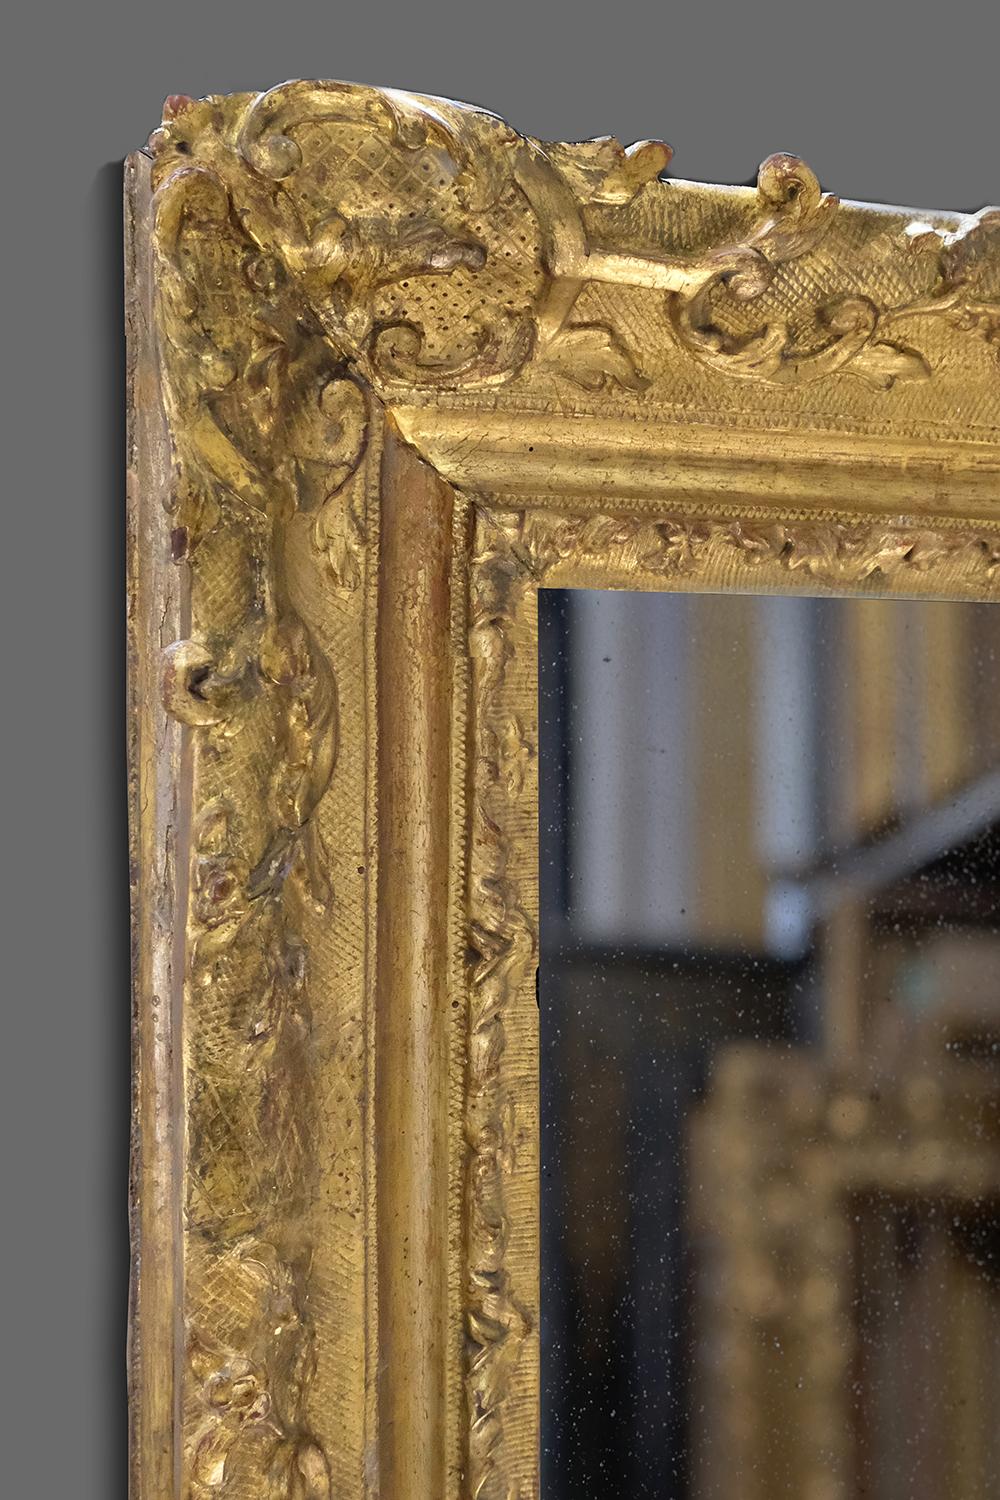 This is a stunning and rare 1st half 18th century hand carved French, Provincial late Baroque frame, with ogee and cavetto profile. It is carved with foliate scroll-&-flower corners and centers on a cross-hatched ground, with quadrillage panels;